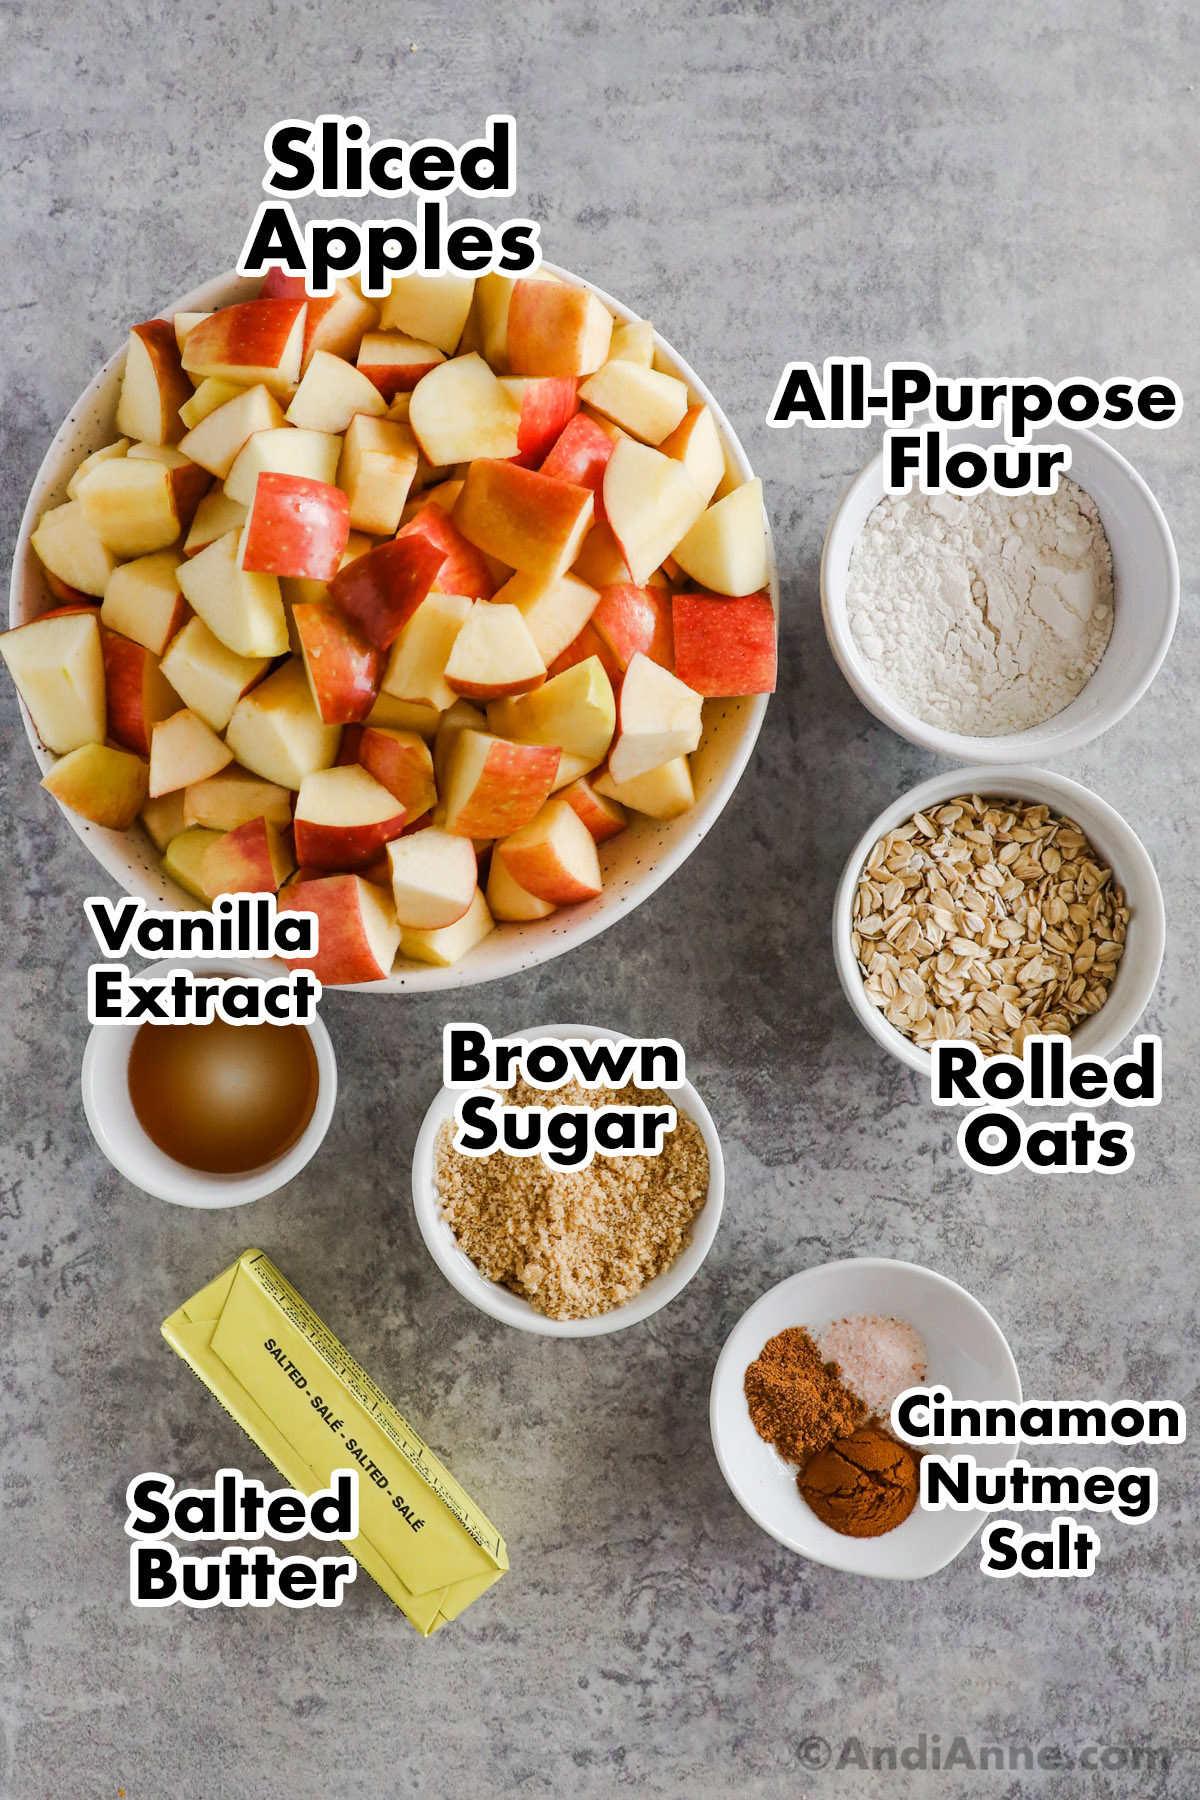 Recipe ingredients including bowls of chopped apples, all purpose flour, rolled oats, brown sugar, vanilla, spices and a stick of butter.